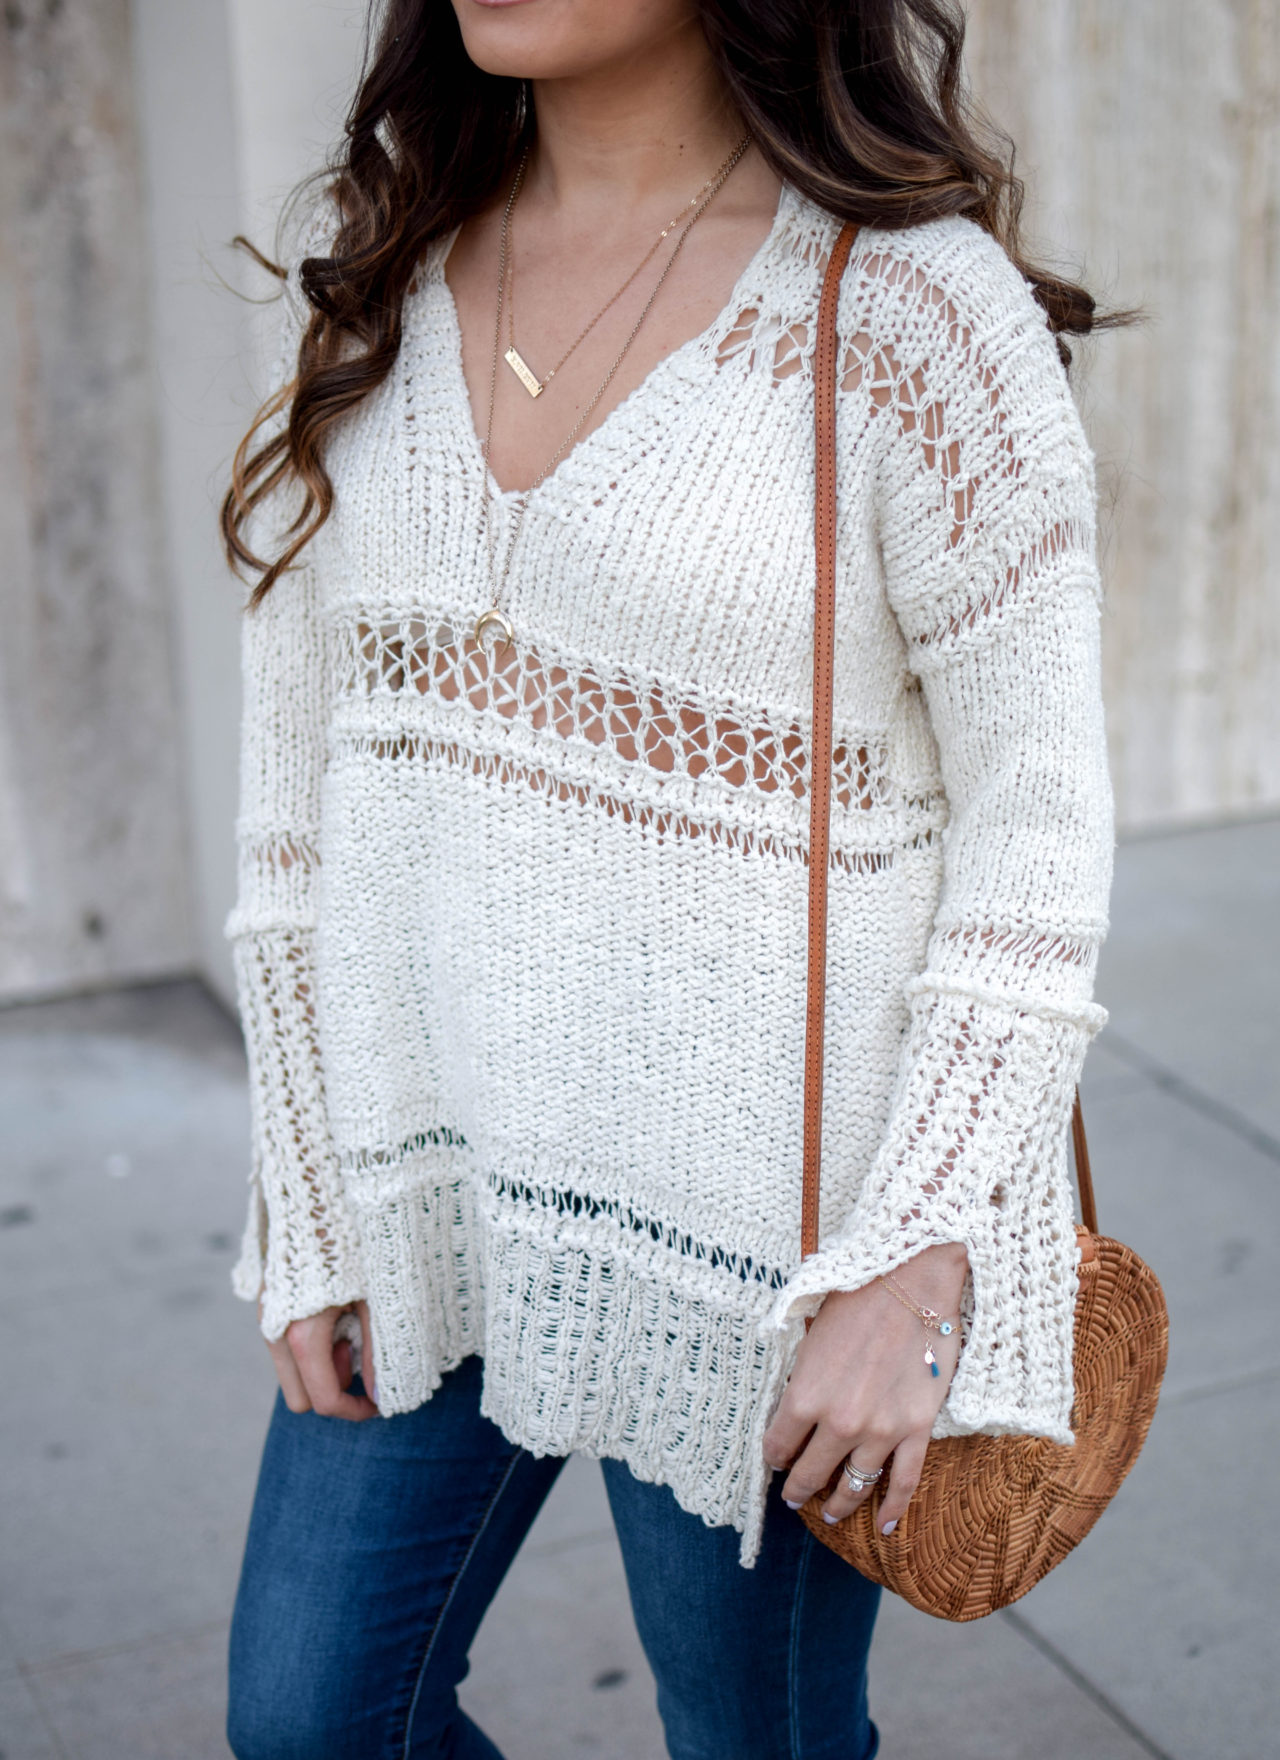 free-people-spring-sweaters-belong-to-you-sweater-0337